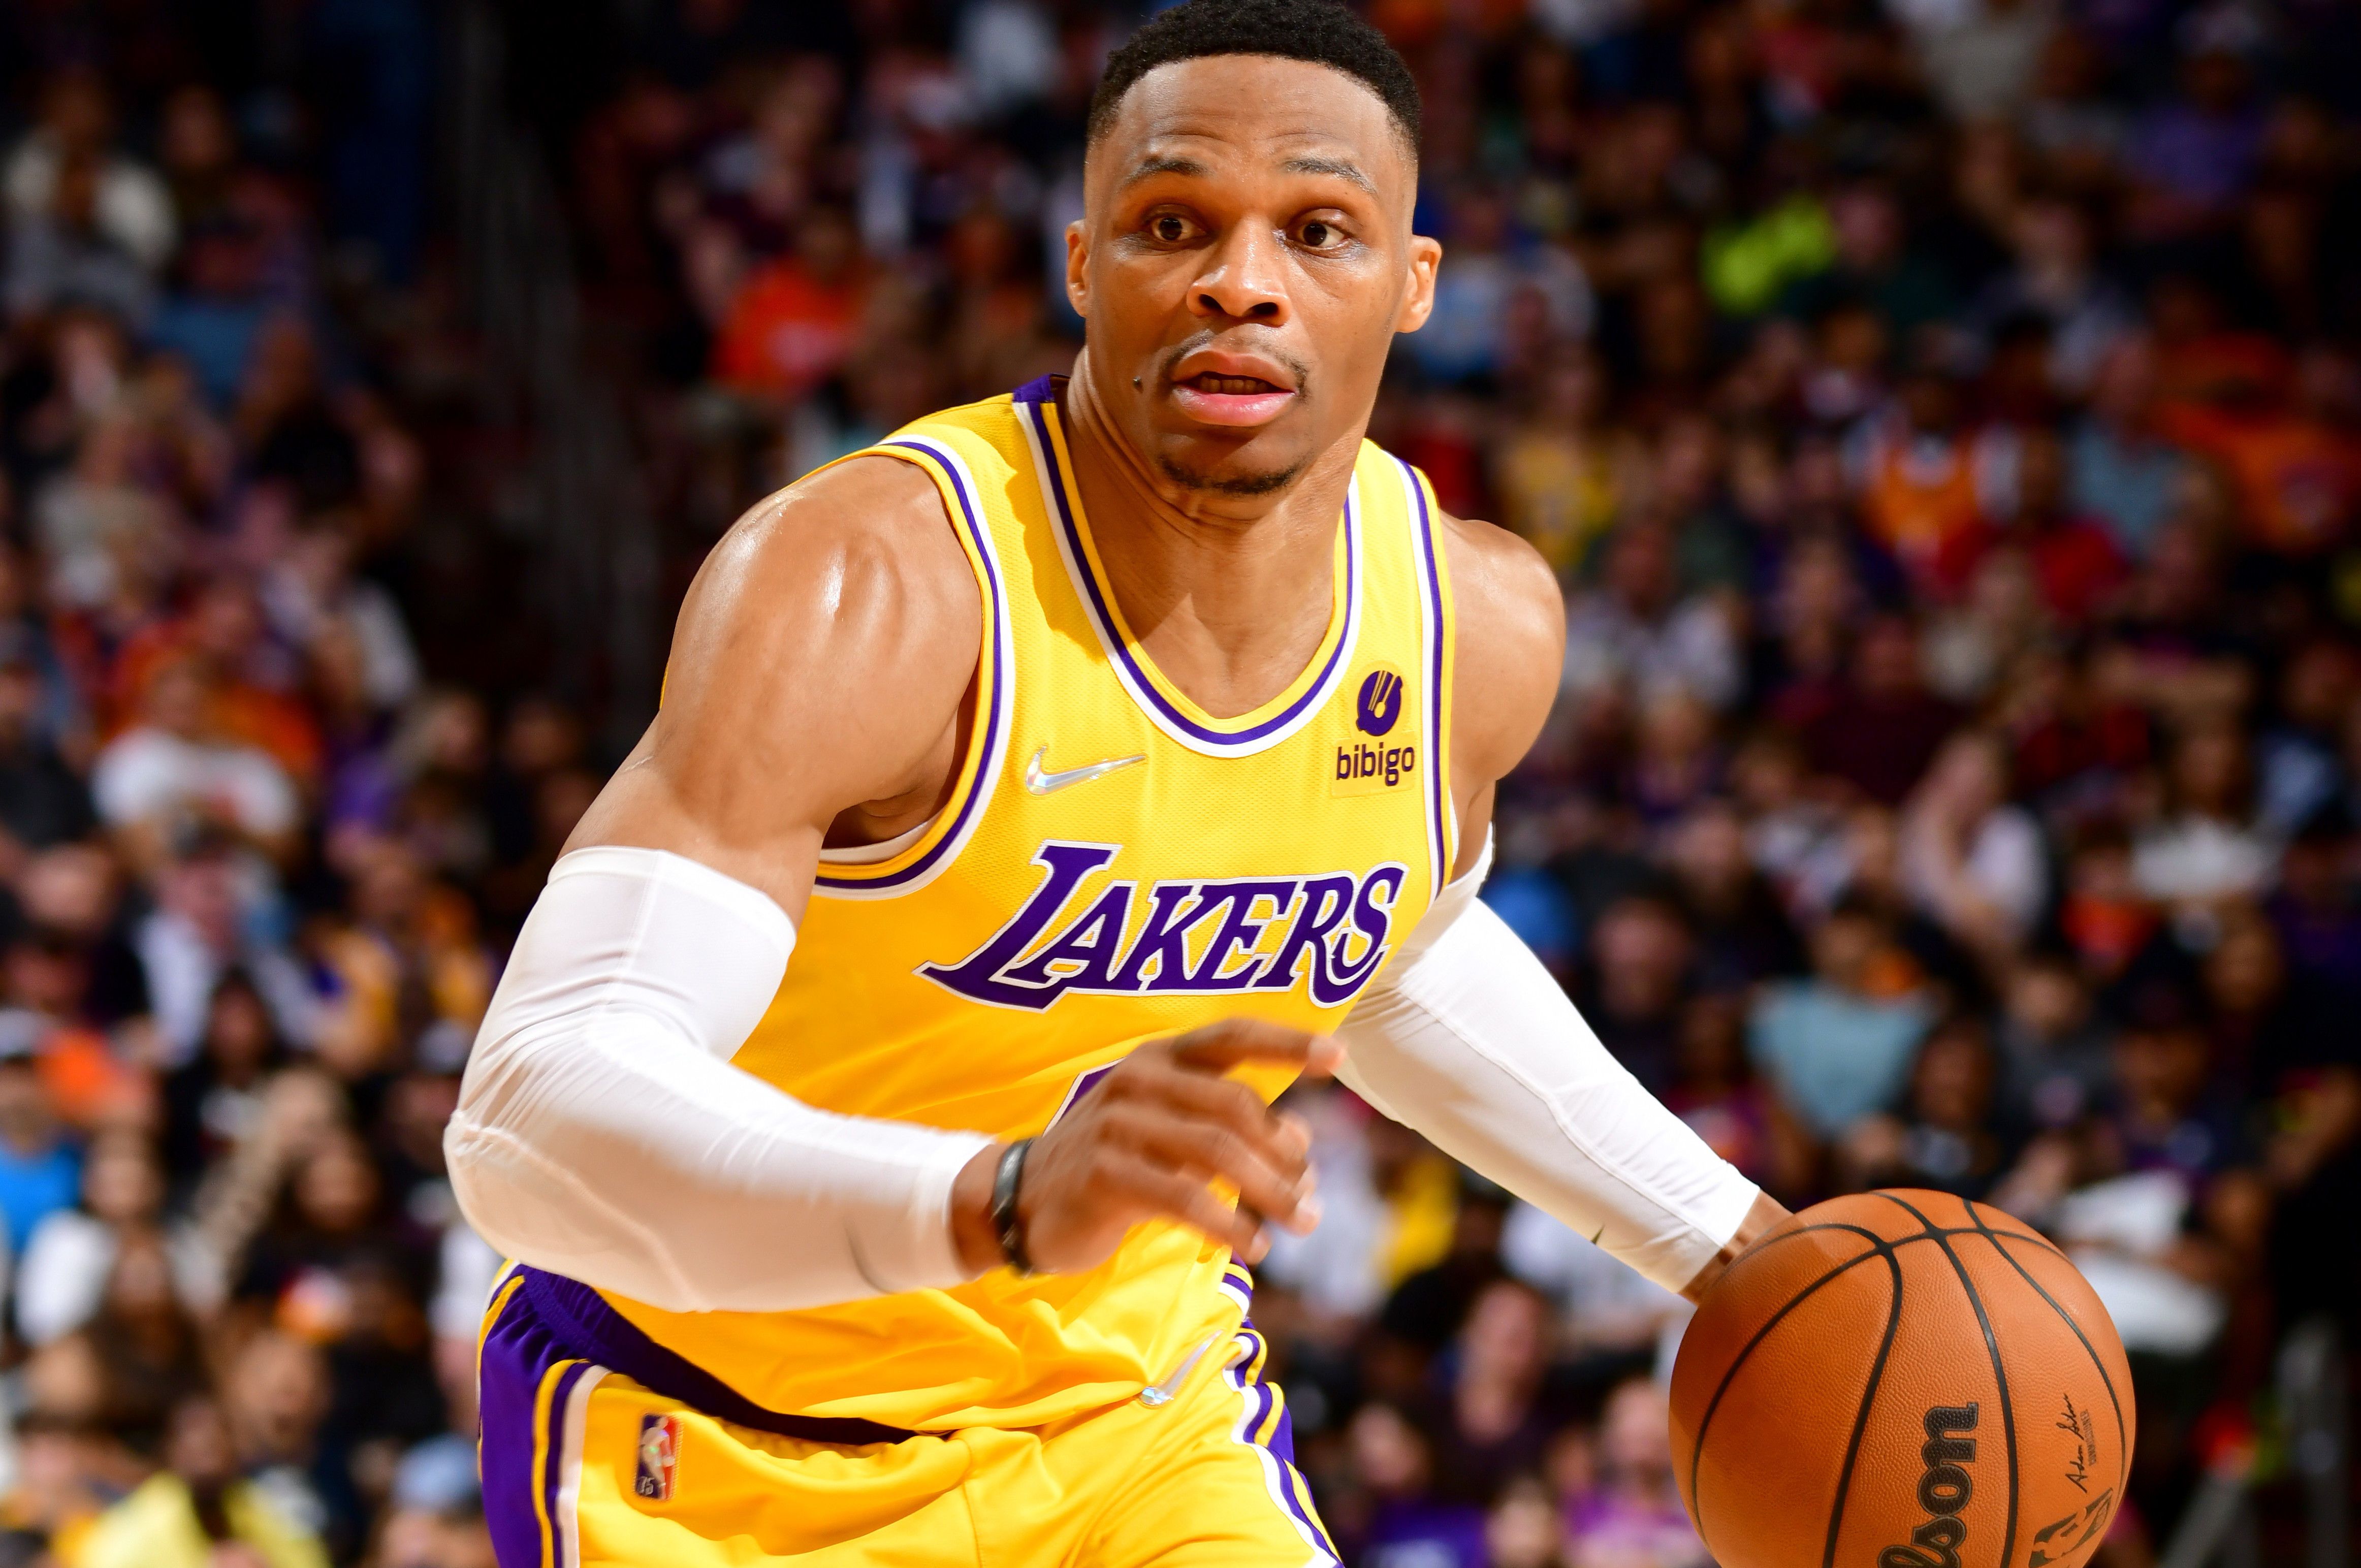 Russell Westbrook Says He Wants to Return to Lakers but 'Nothing Is Promised'